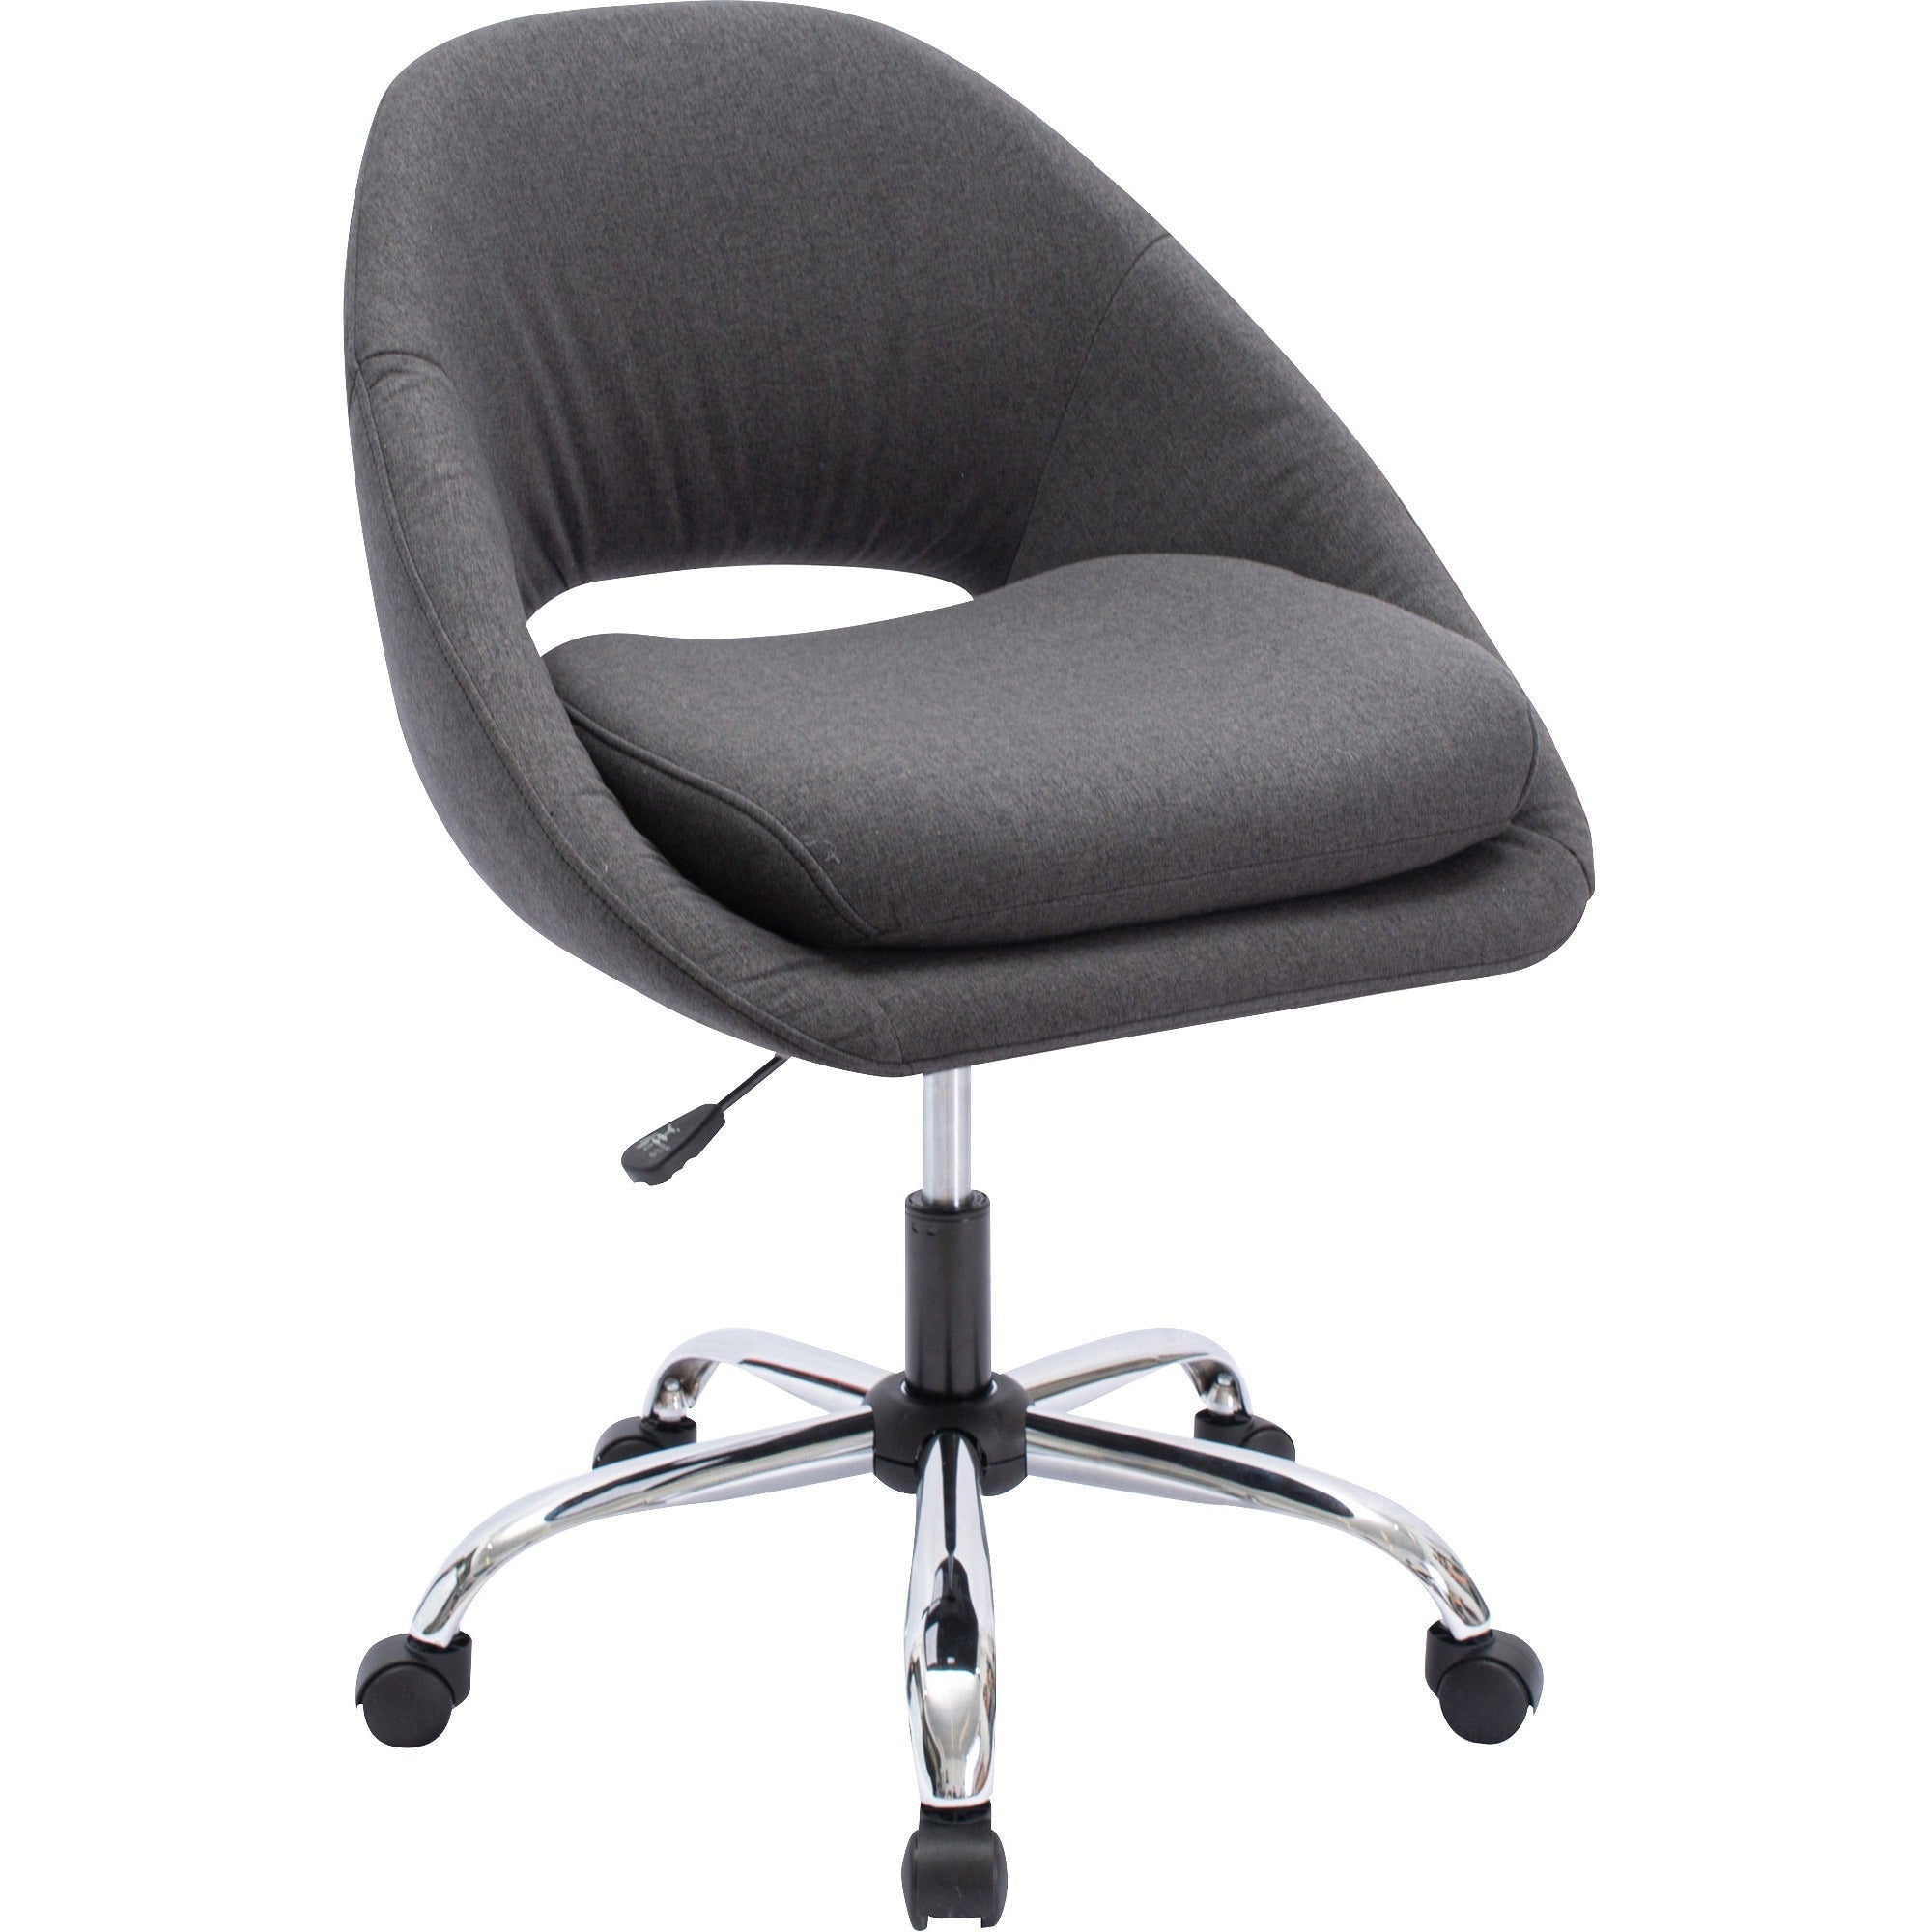 nusparc-resimercial-lounge-task-chair-neutral-gray-fabric-seat-low-back-5-star-base-gray-1-each_nprch305fngy - 1